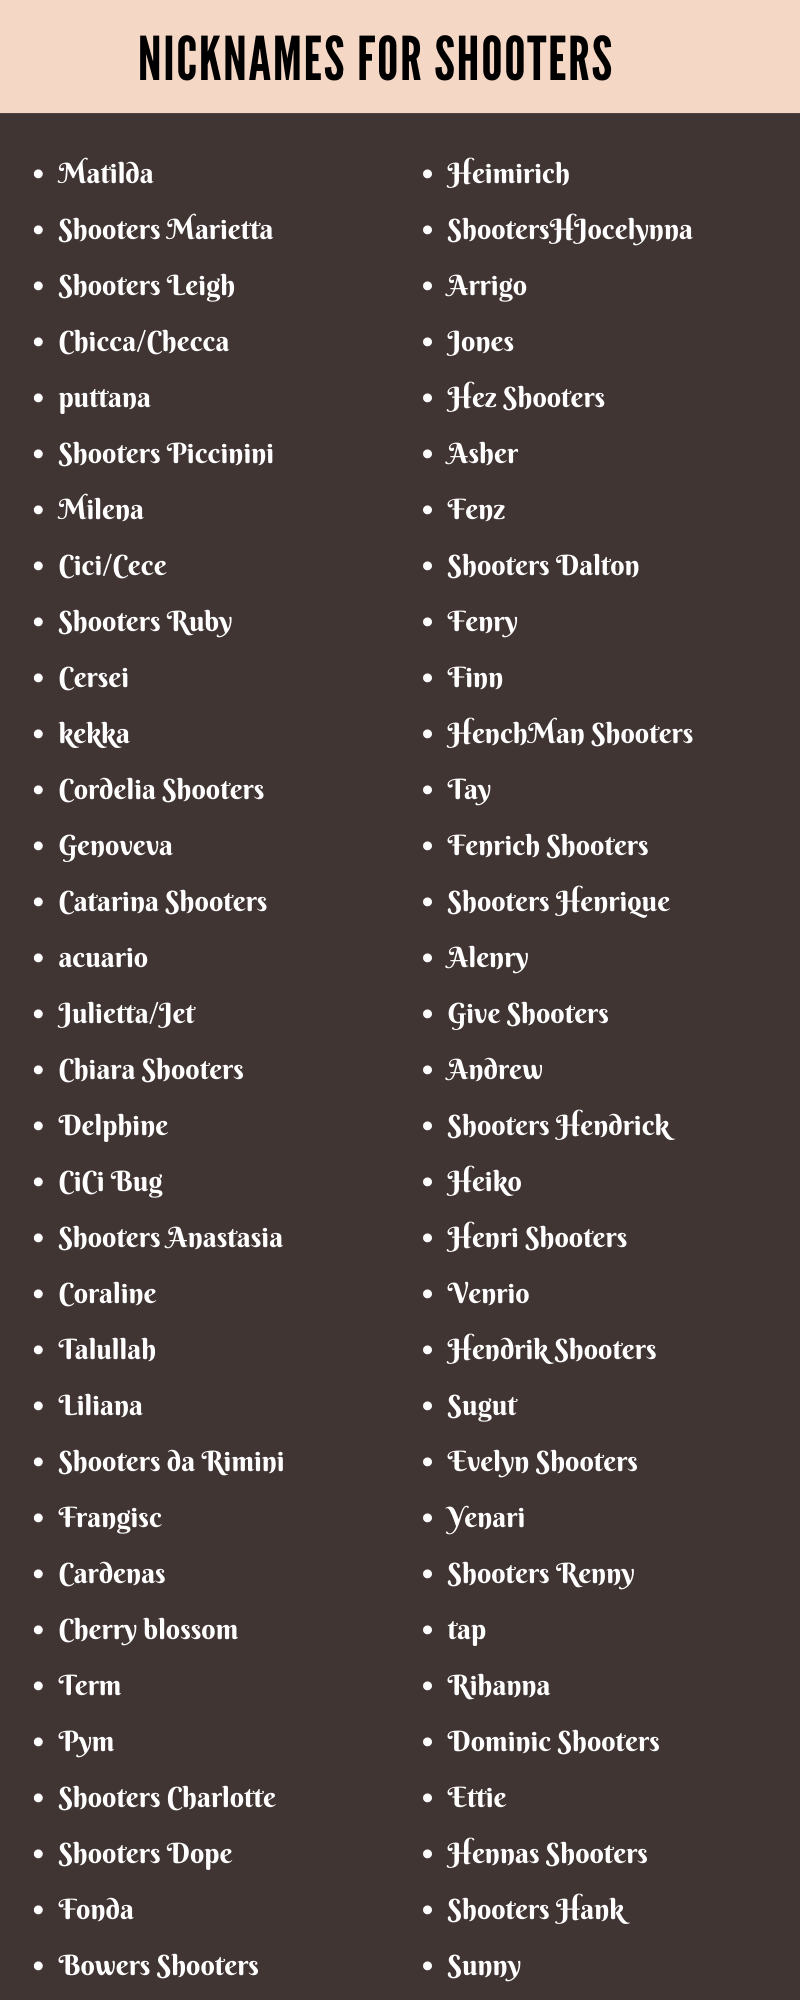 Nicknames For Shooters